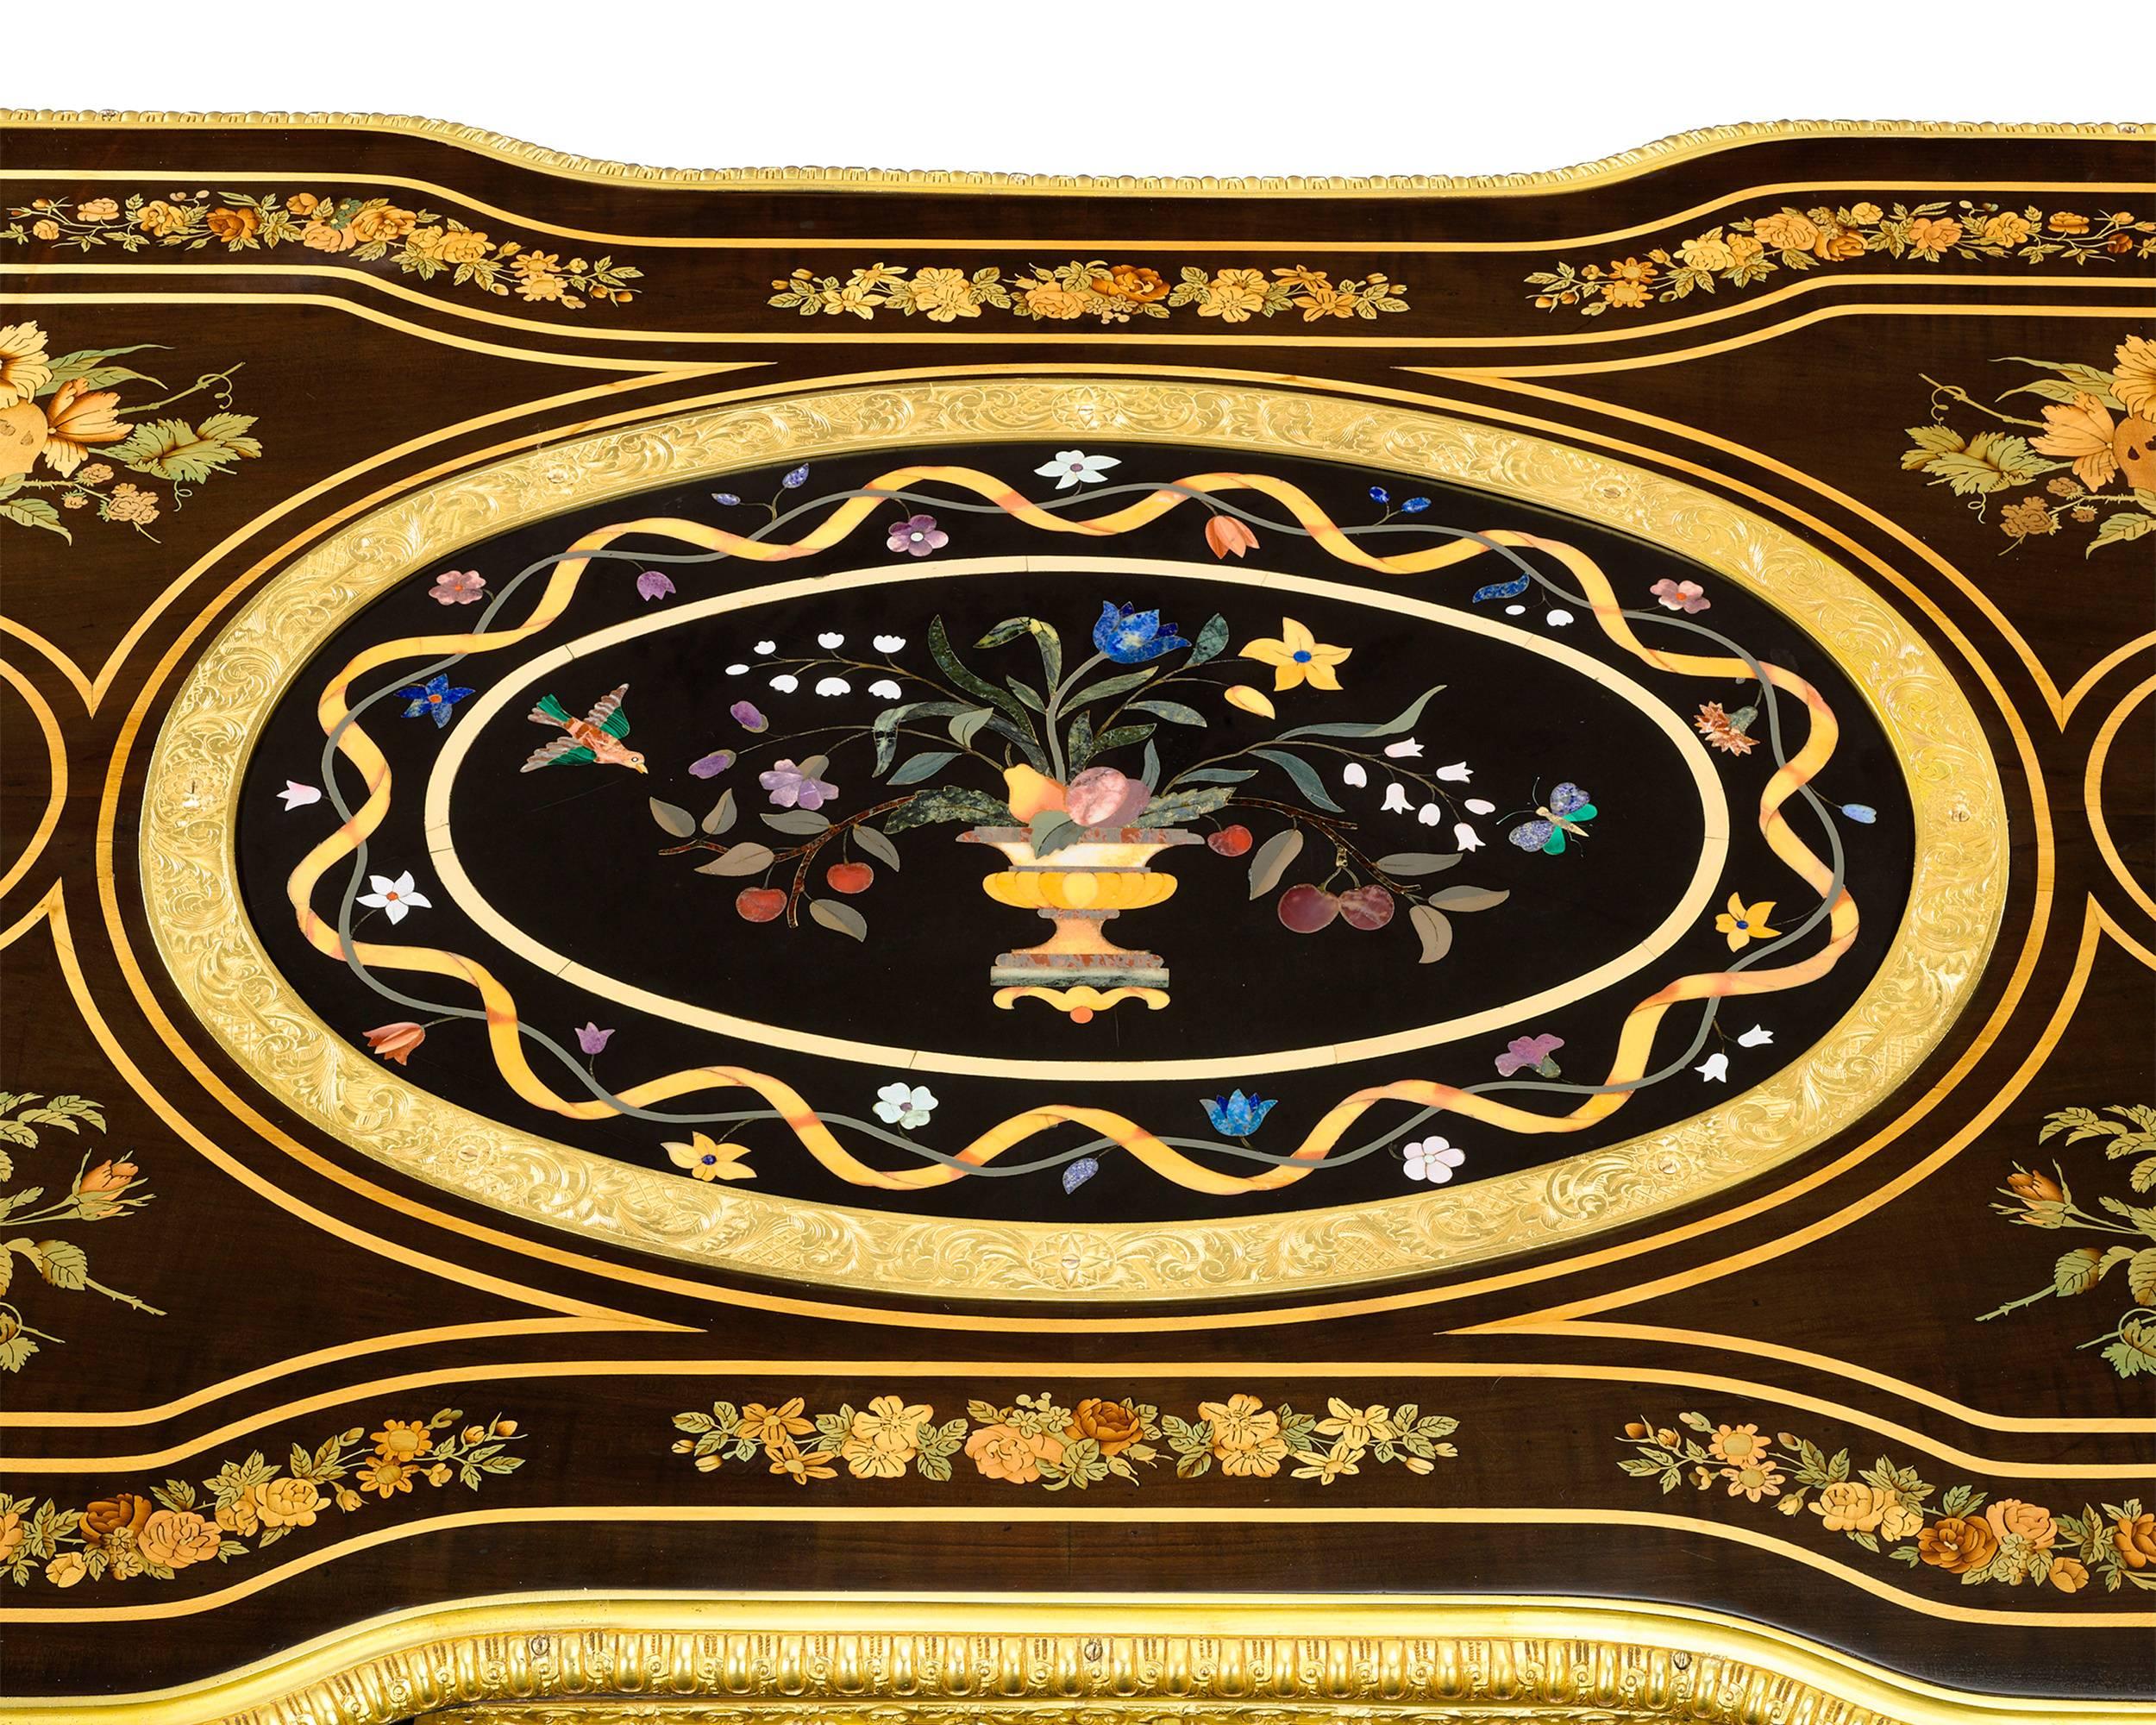 Embodying luxury and masterful craftsmanship, this incredible Napoleon III-period bureau plat an illustrious example of 19th-century French furniture making at its finest. Clearly executed by a ébéniste of tremendous skill, this remarkable writing